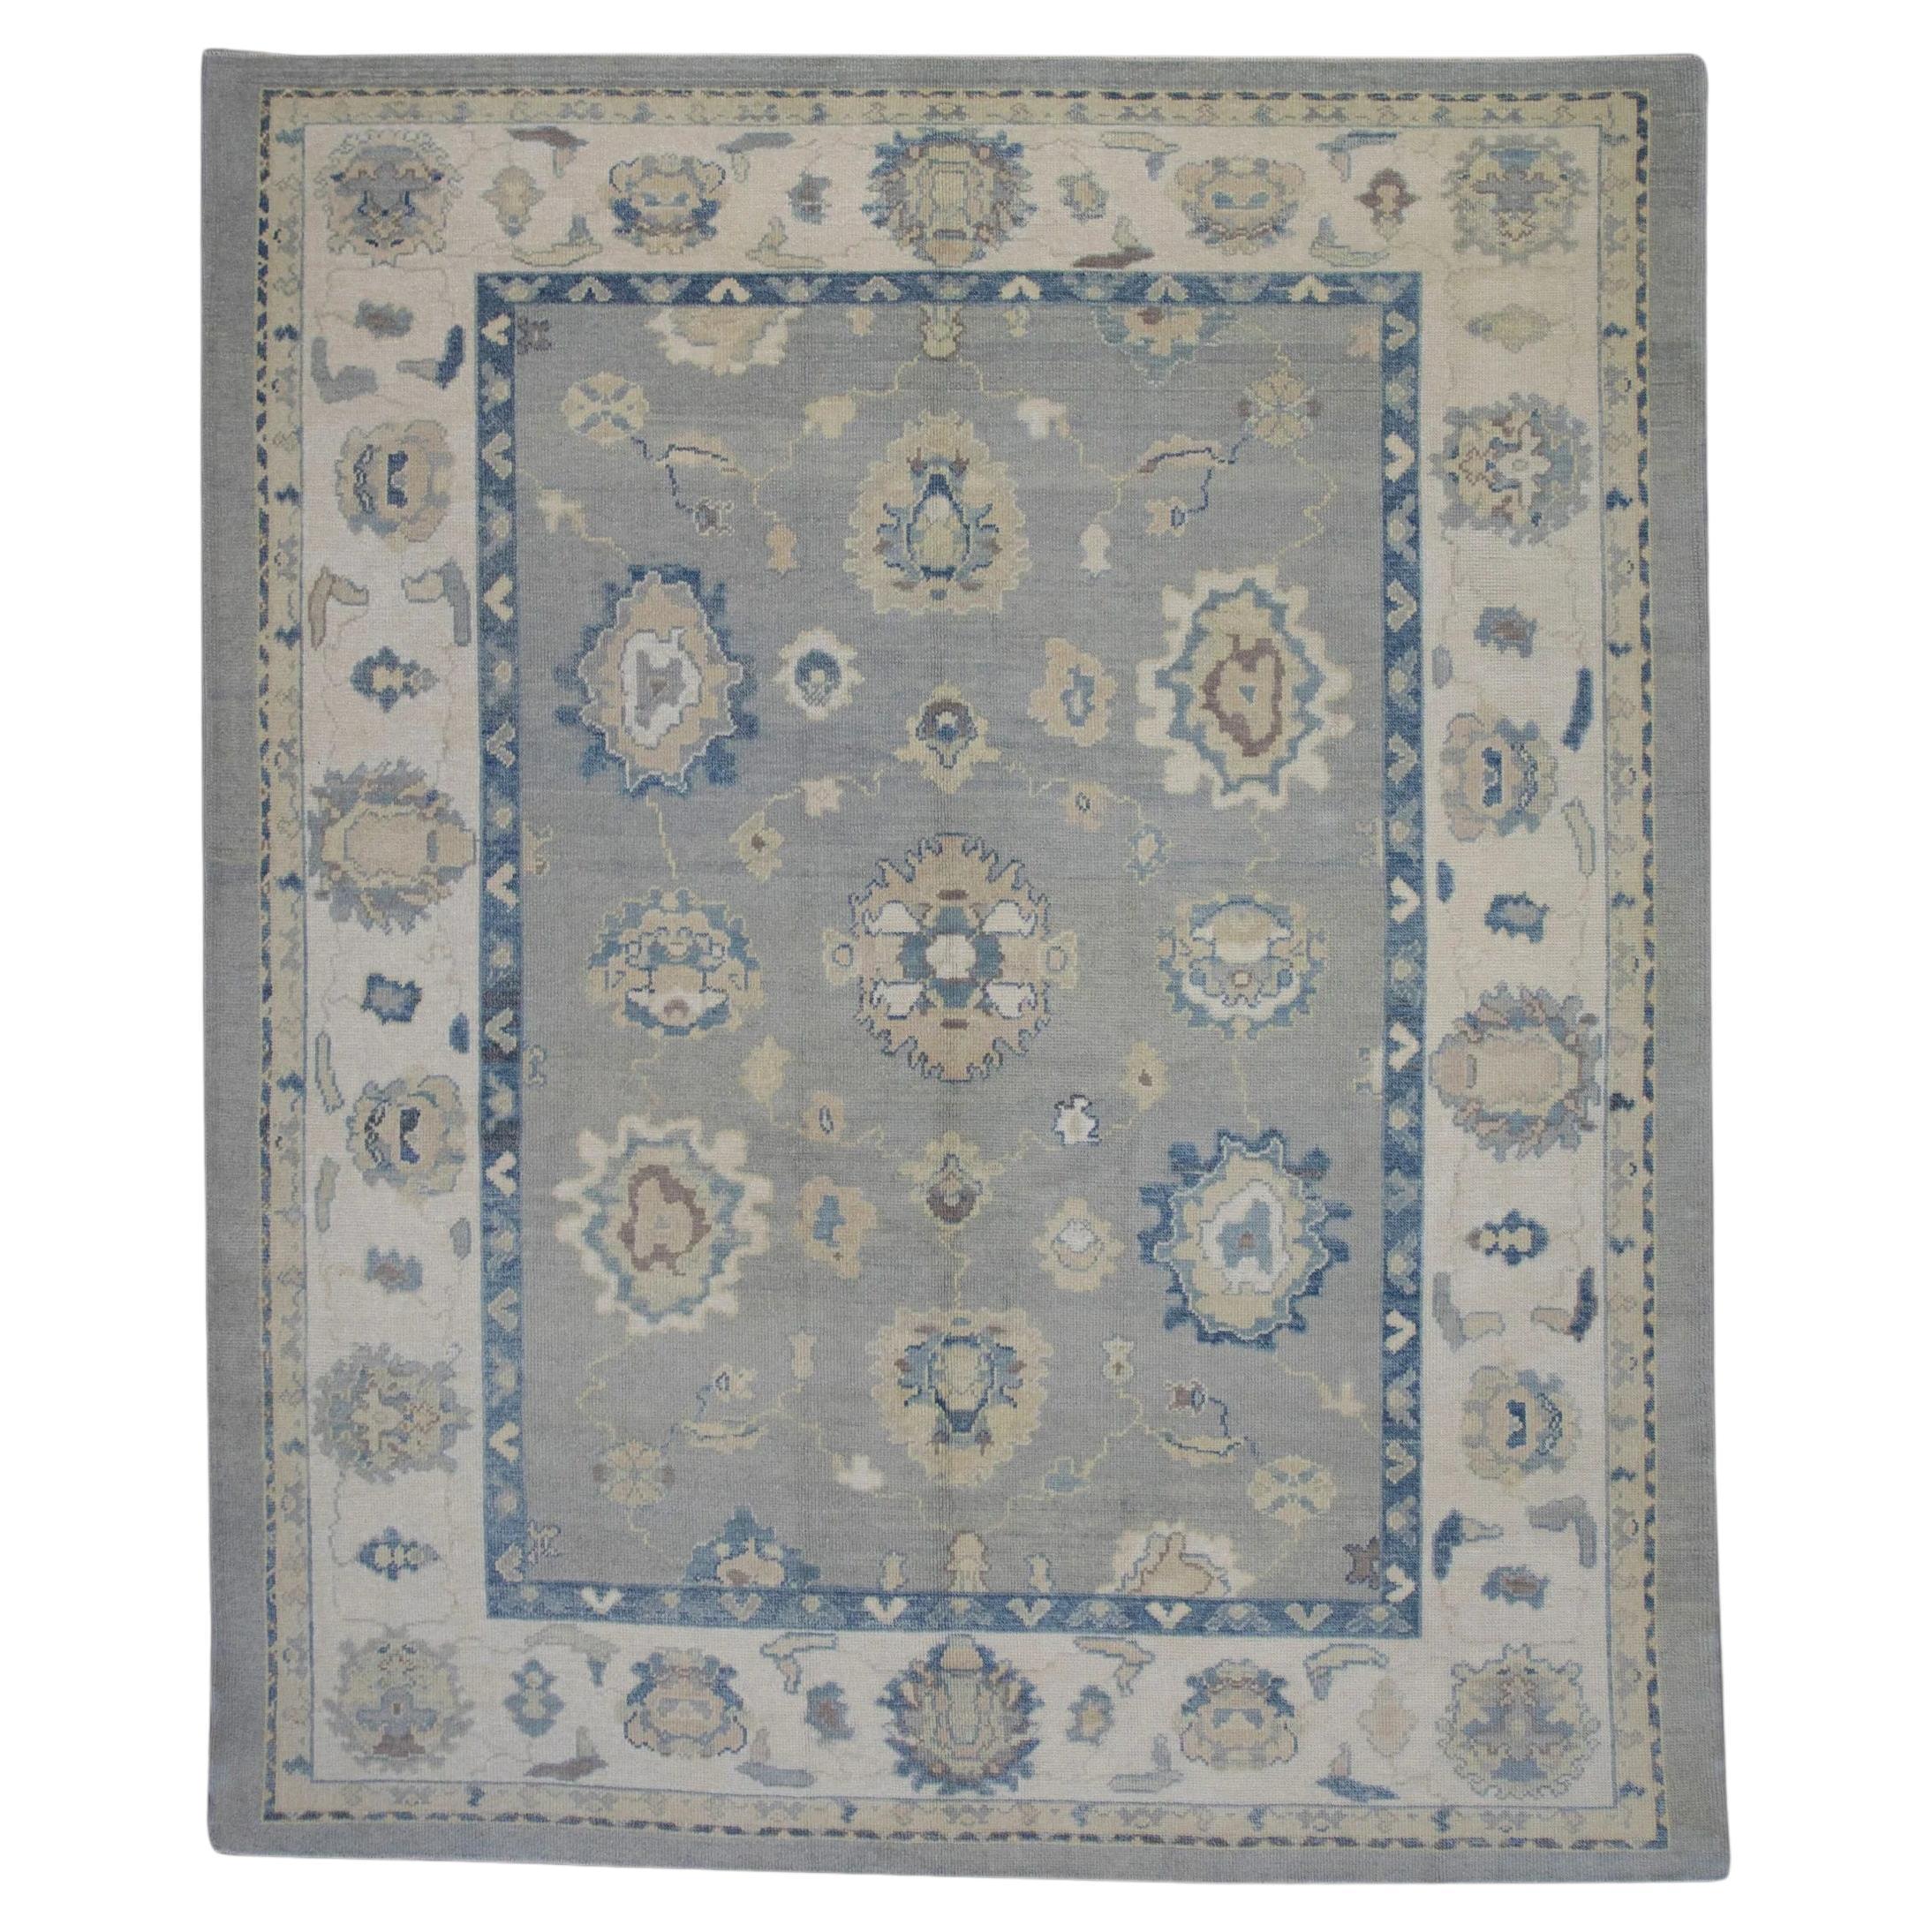 Handwoven Wool Floral Turkish Oushak Rug in Shades of Blue 9' x 10'6"